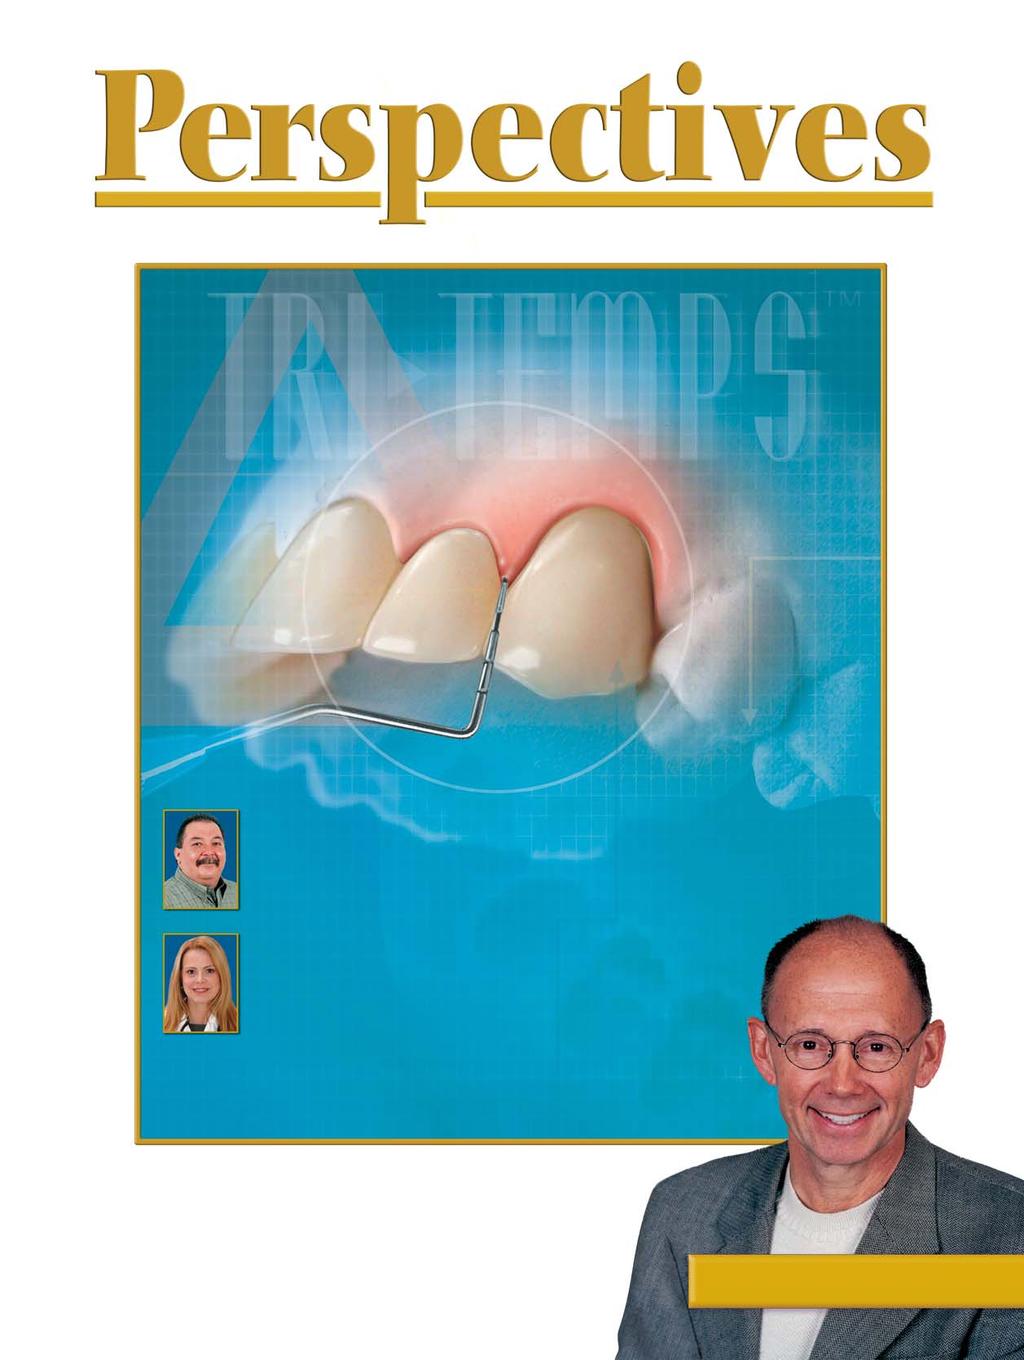 Spring 2004 Volume 3, Number 1 Dental Practice Building Strategies Expedient Processing of Tri-Temps Restorations Fidel Montiel The Diagnostic and Esthetic Potential of Tri-Temps Provisional